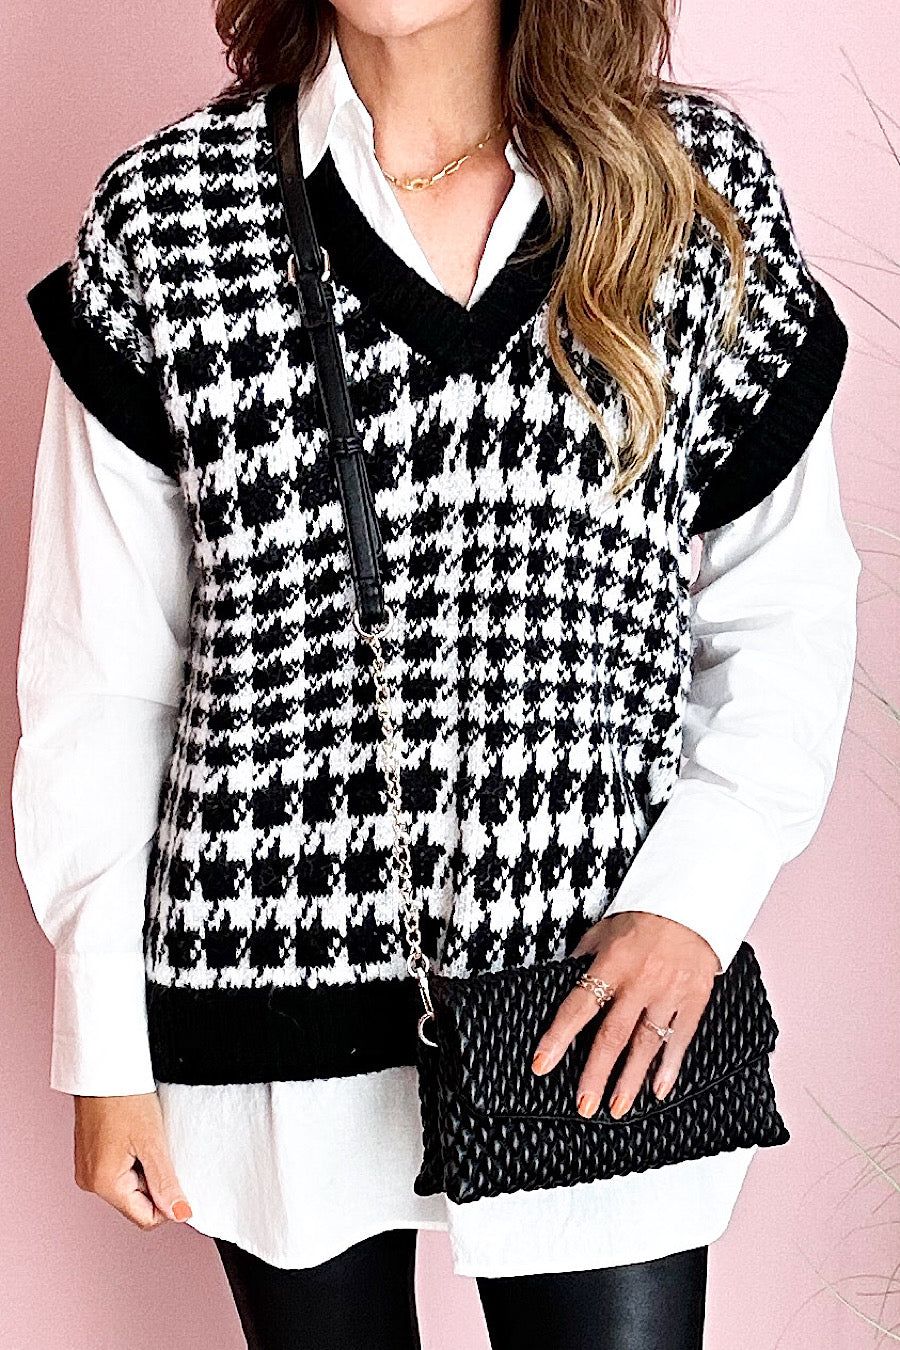 In Session Houndstooth Layered Top